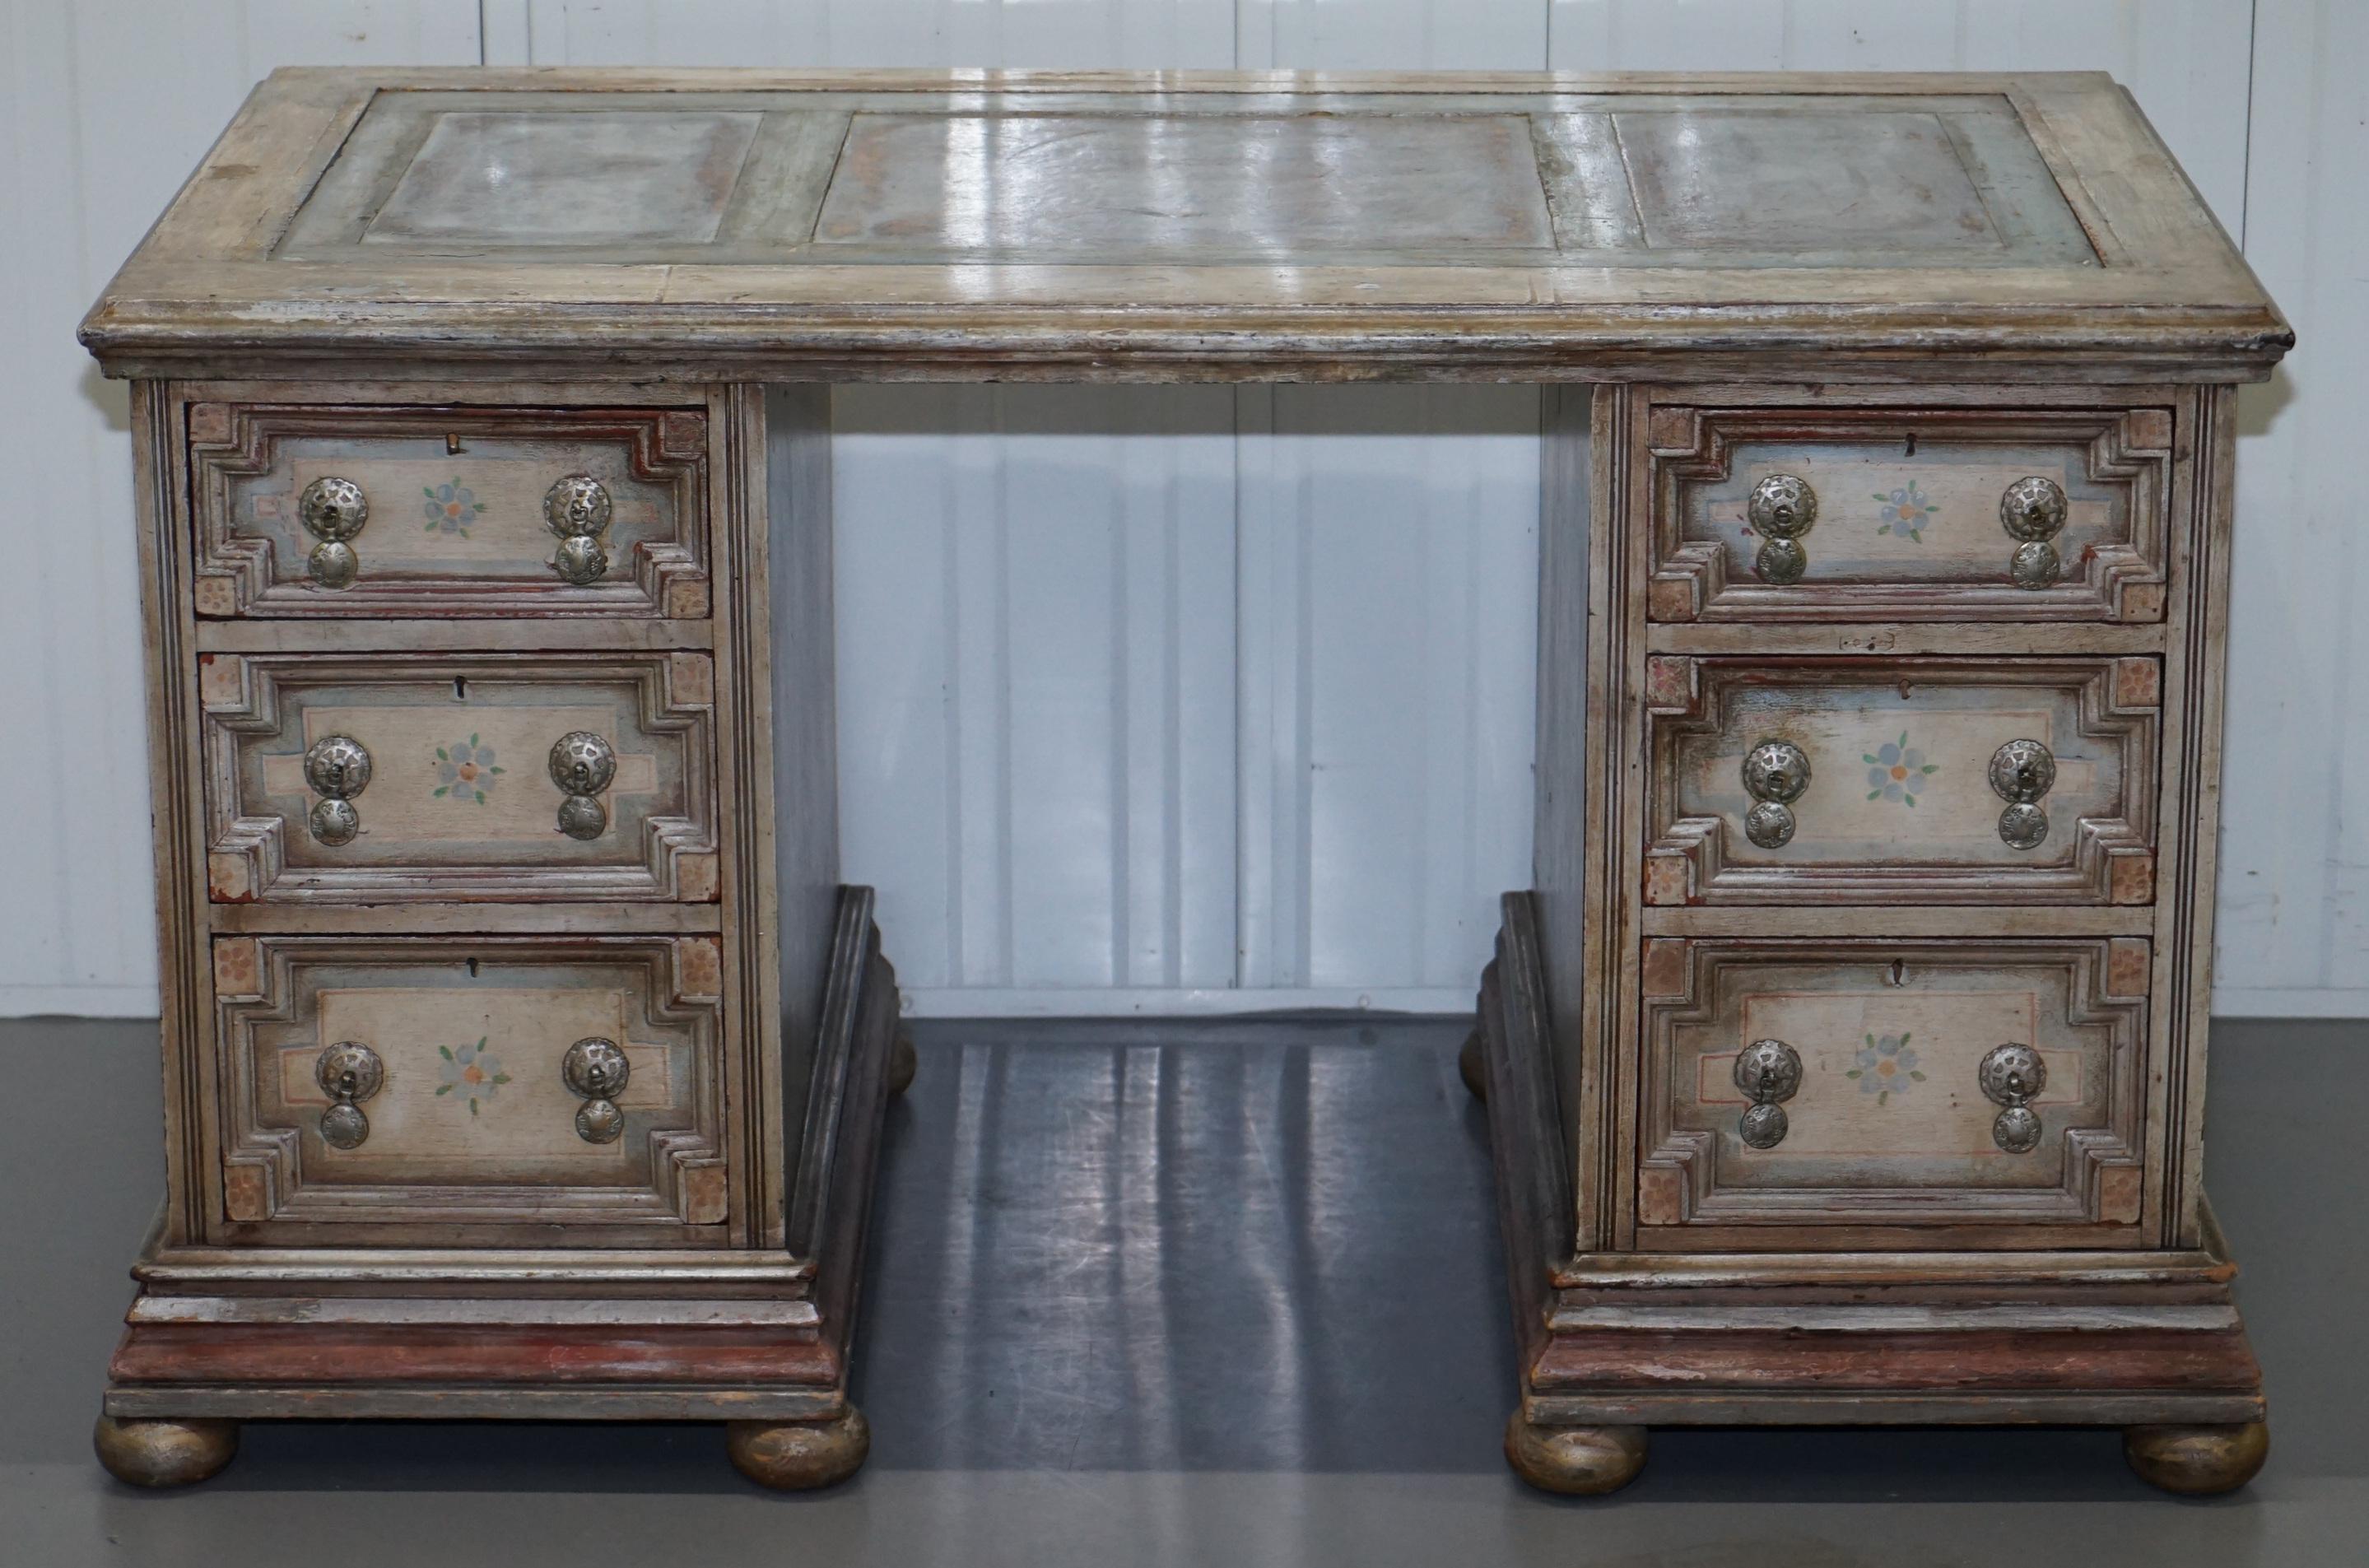 We are delighted to offer for sale this lovely hand painted circa 1940 solid oak best by the Marquis d'Oisy Ambrose Thomas (1880-1959)

The painted pedestal desk is circa 1940-1950, decorated and painted by the Marquis d'Oisy, with a leather top,